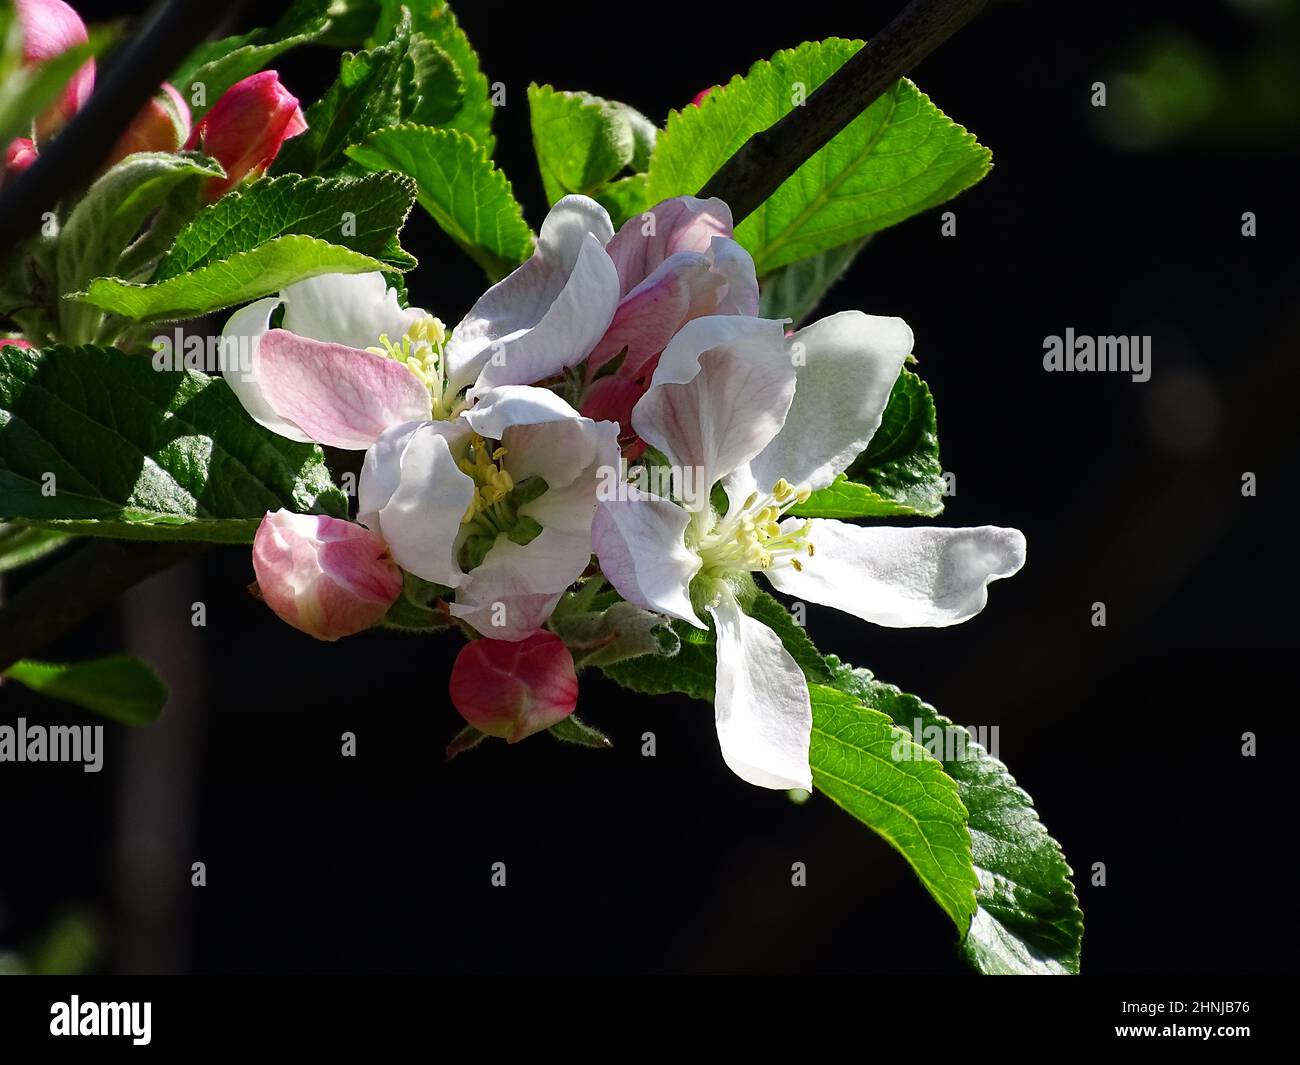 close up of the blossom of an apple tree (Cox orange pippin), with a blurred black background, with colors green, white, light purple and black Stock Photo